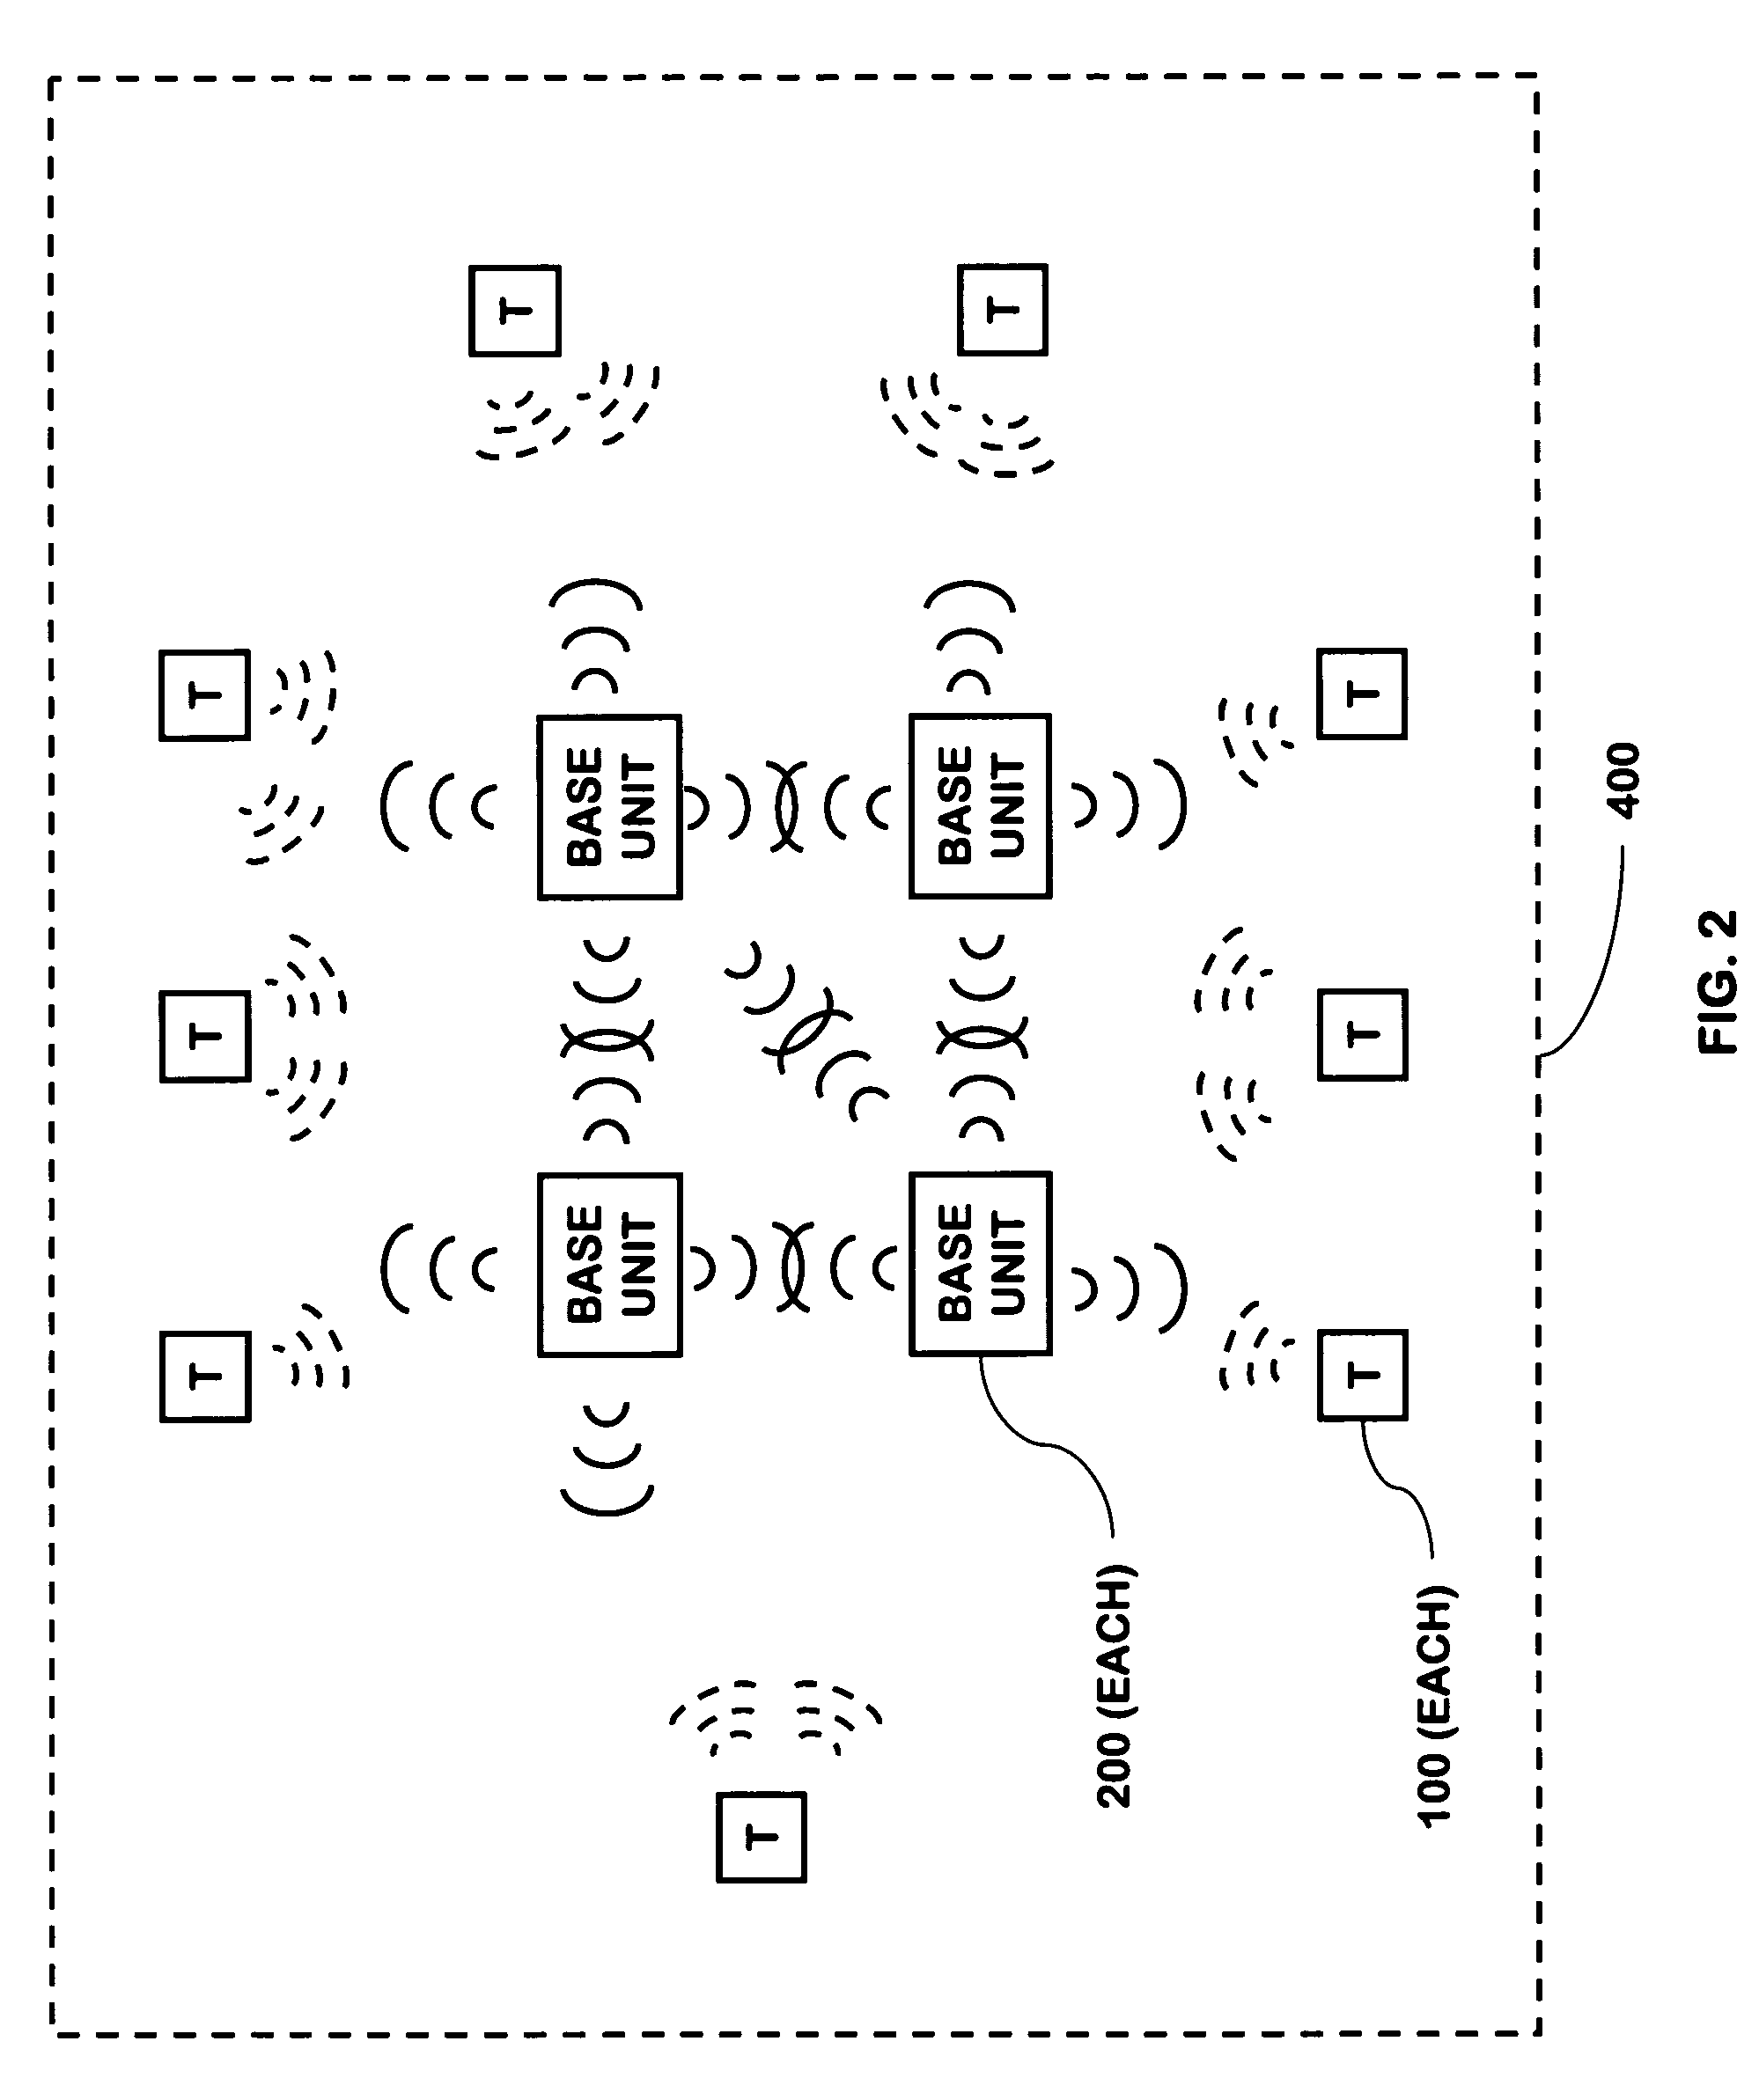 Communications architecture for a security network